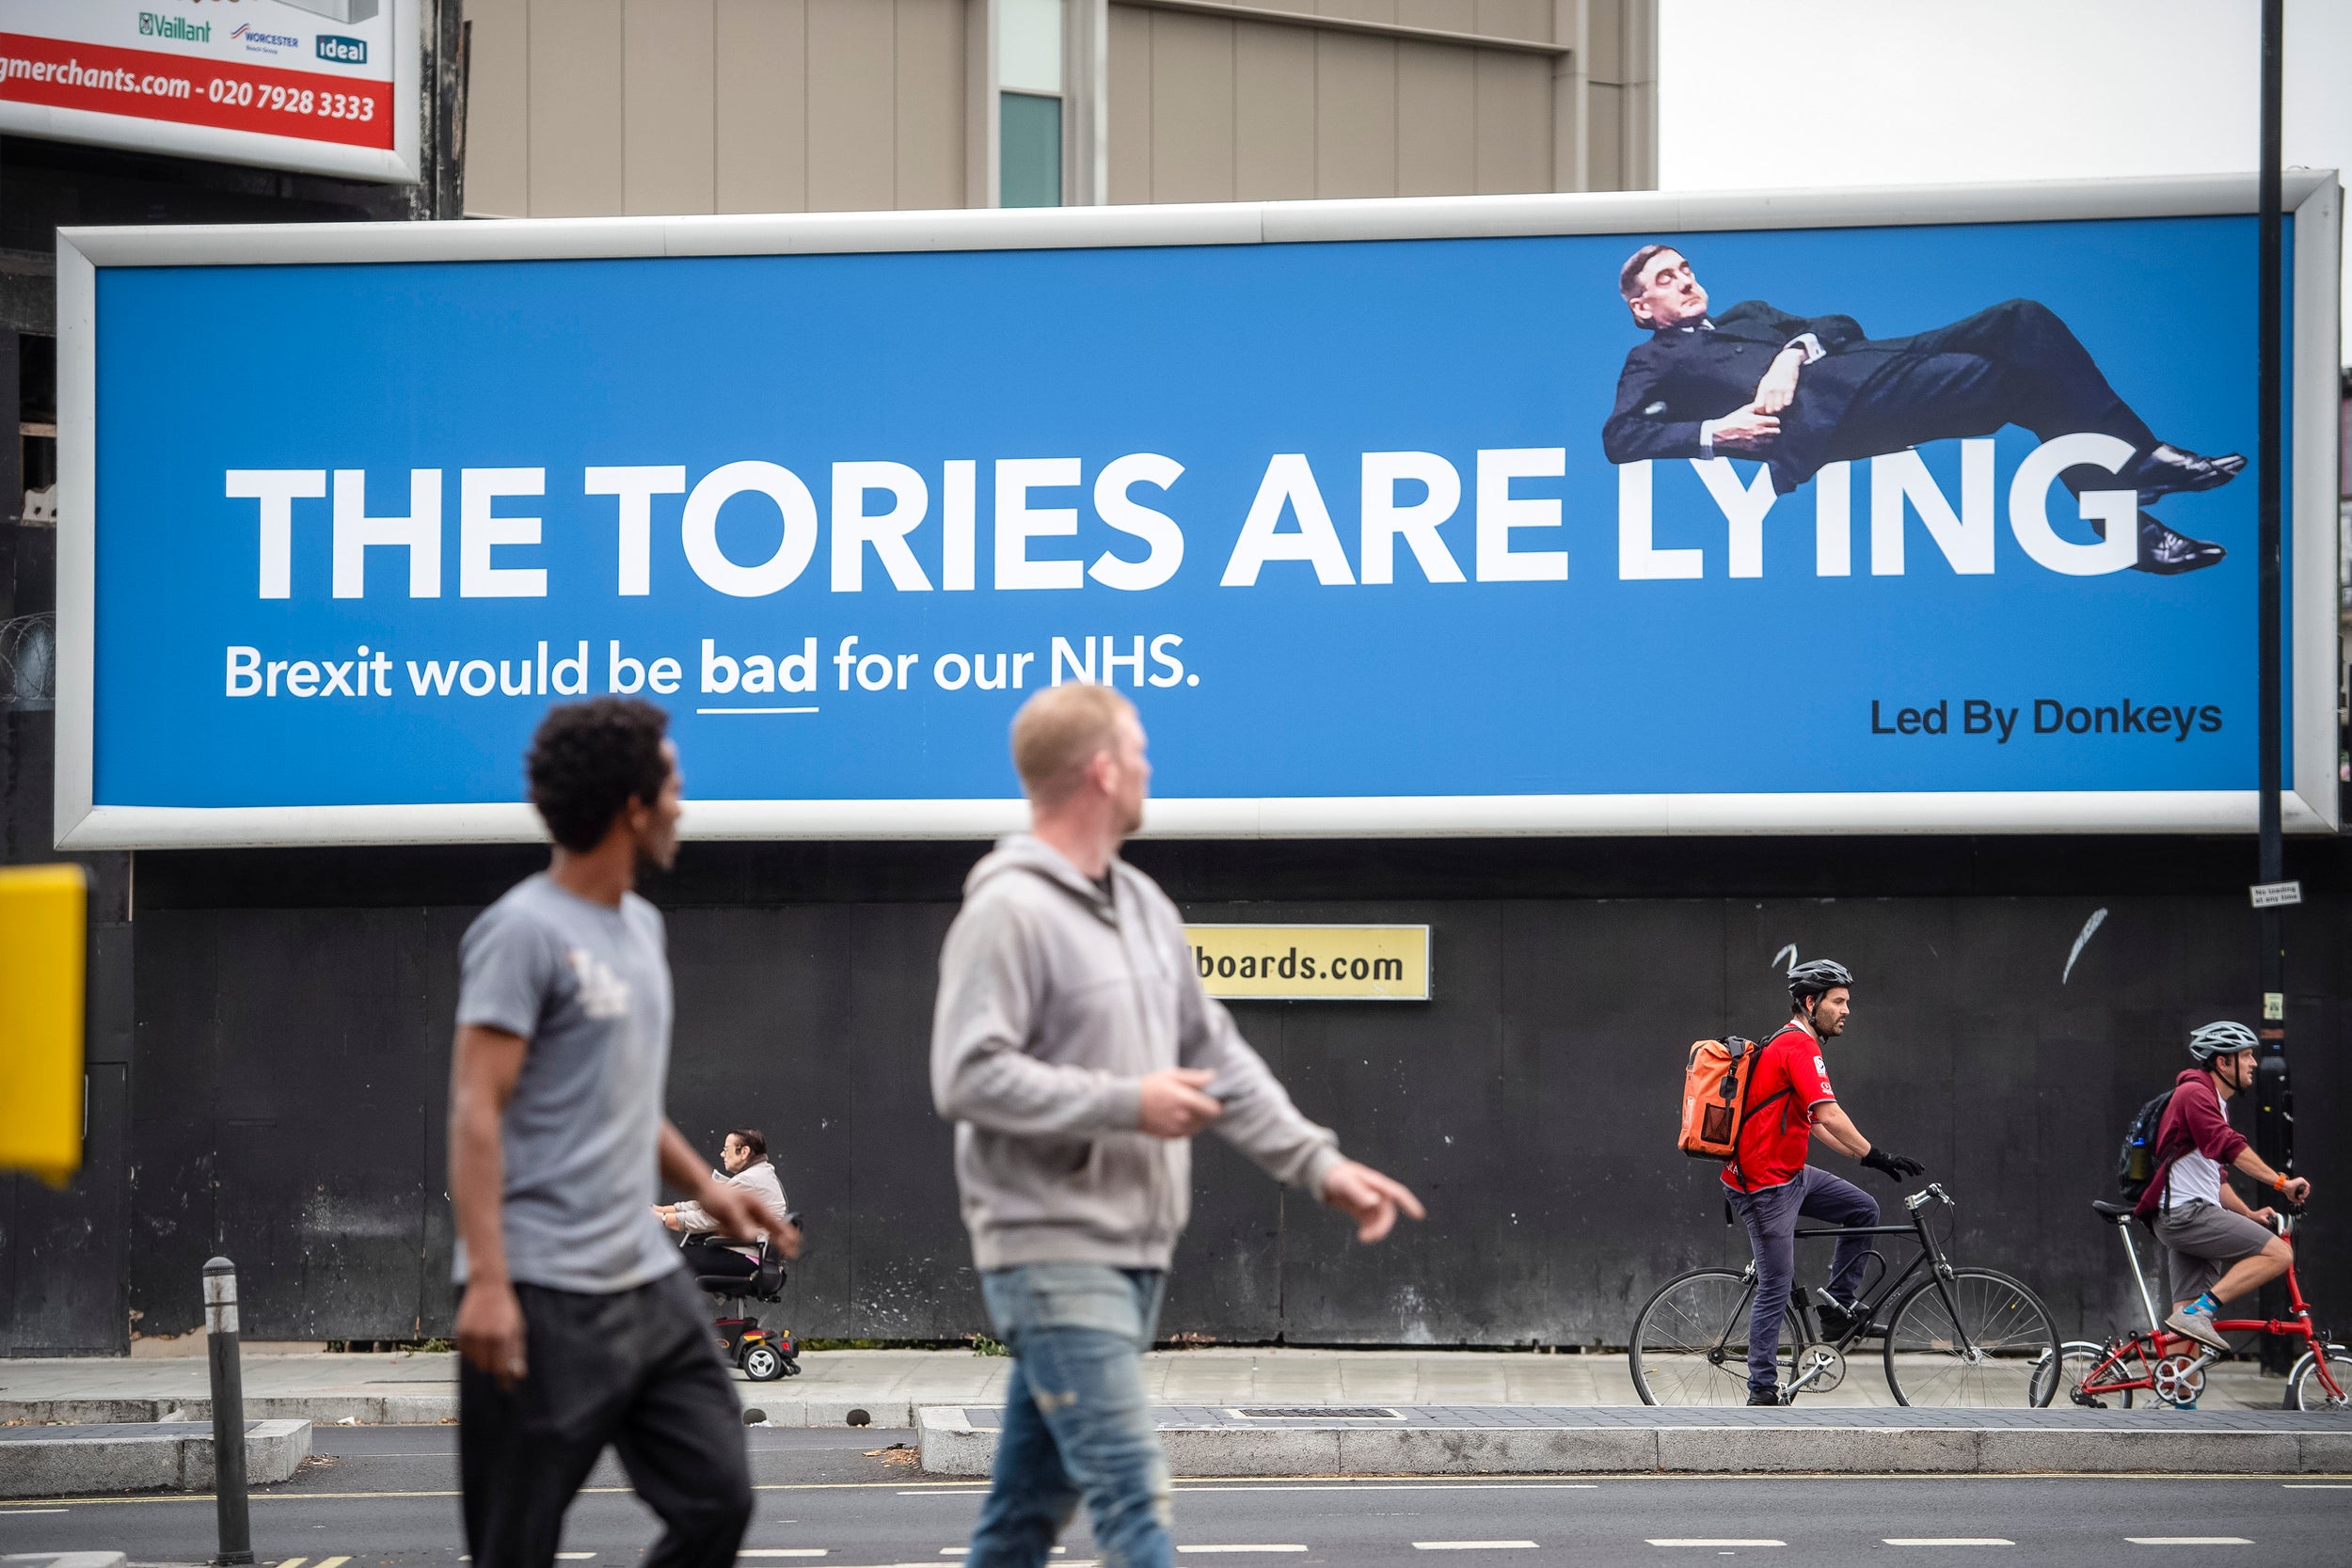 Own a section of ‘The Tories Are Lying’ billboard with this limited edition